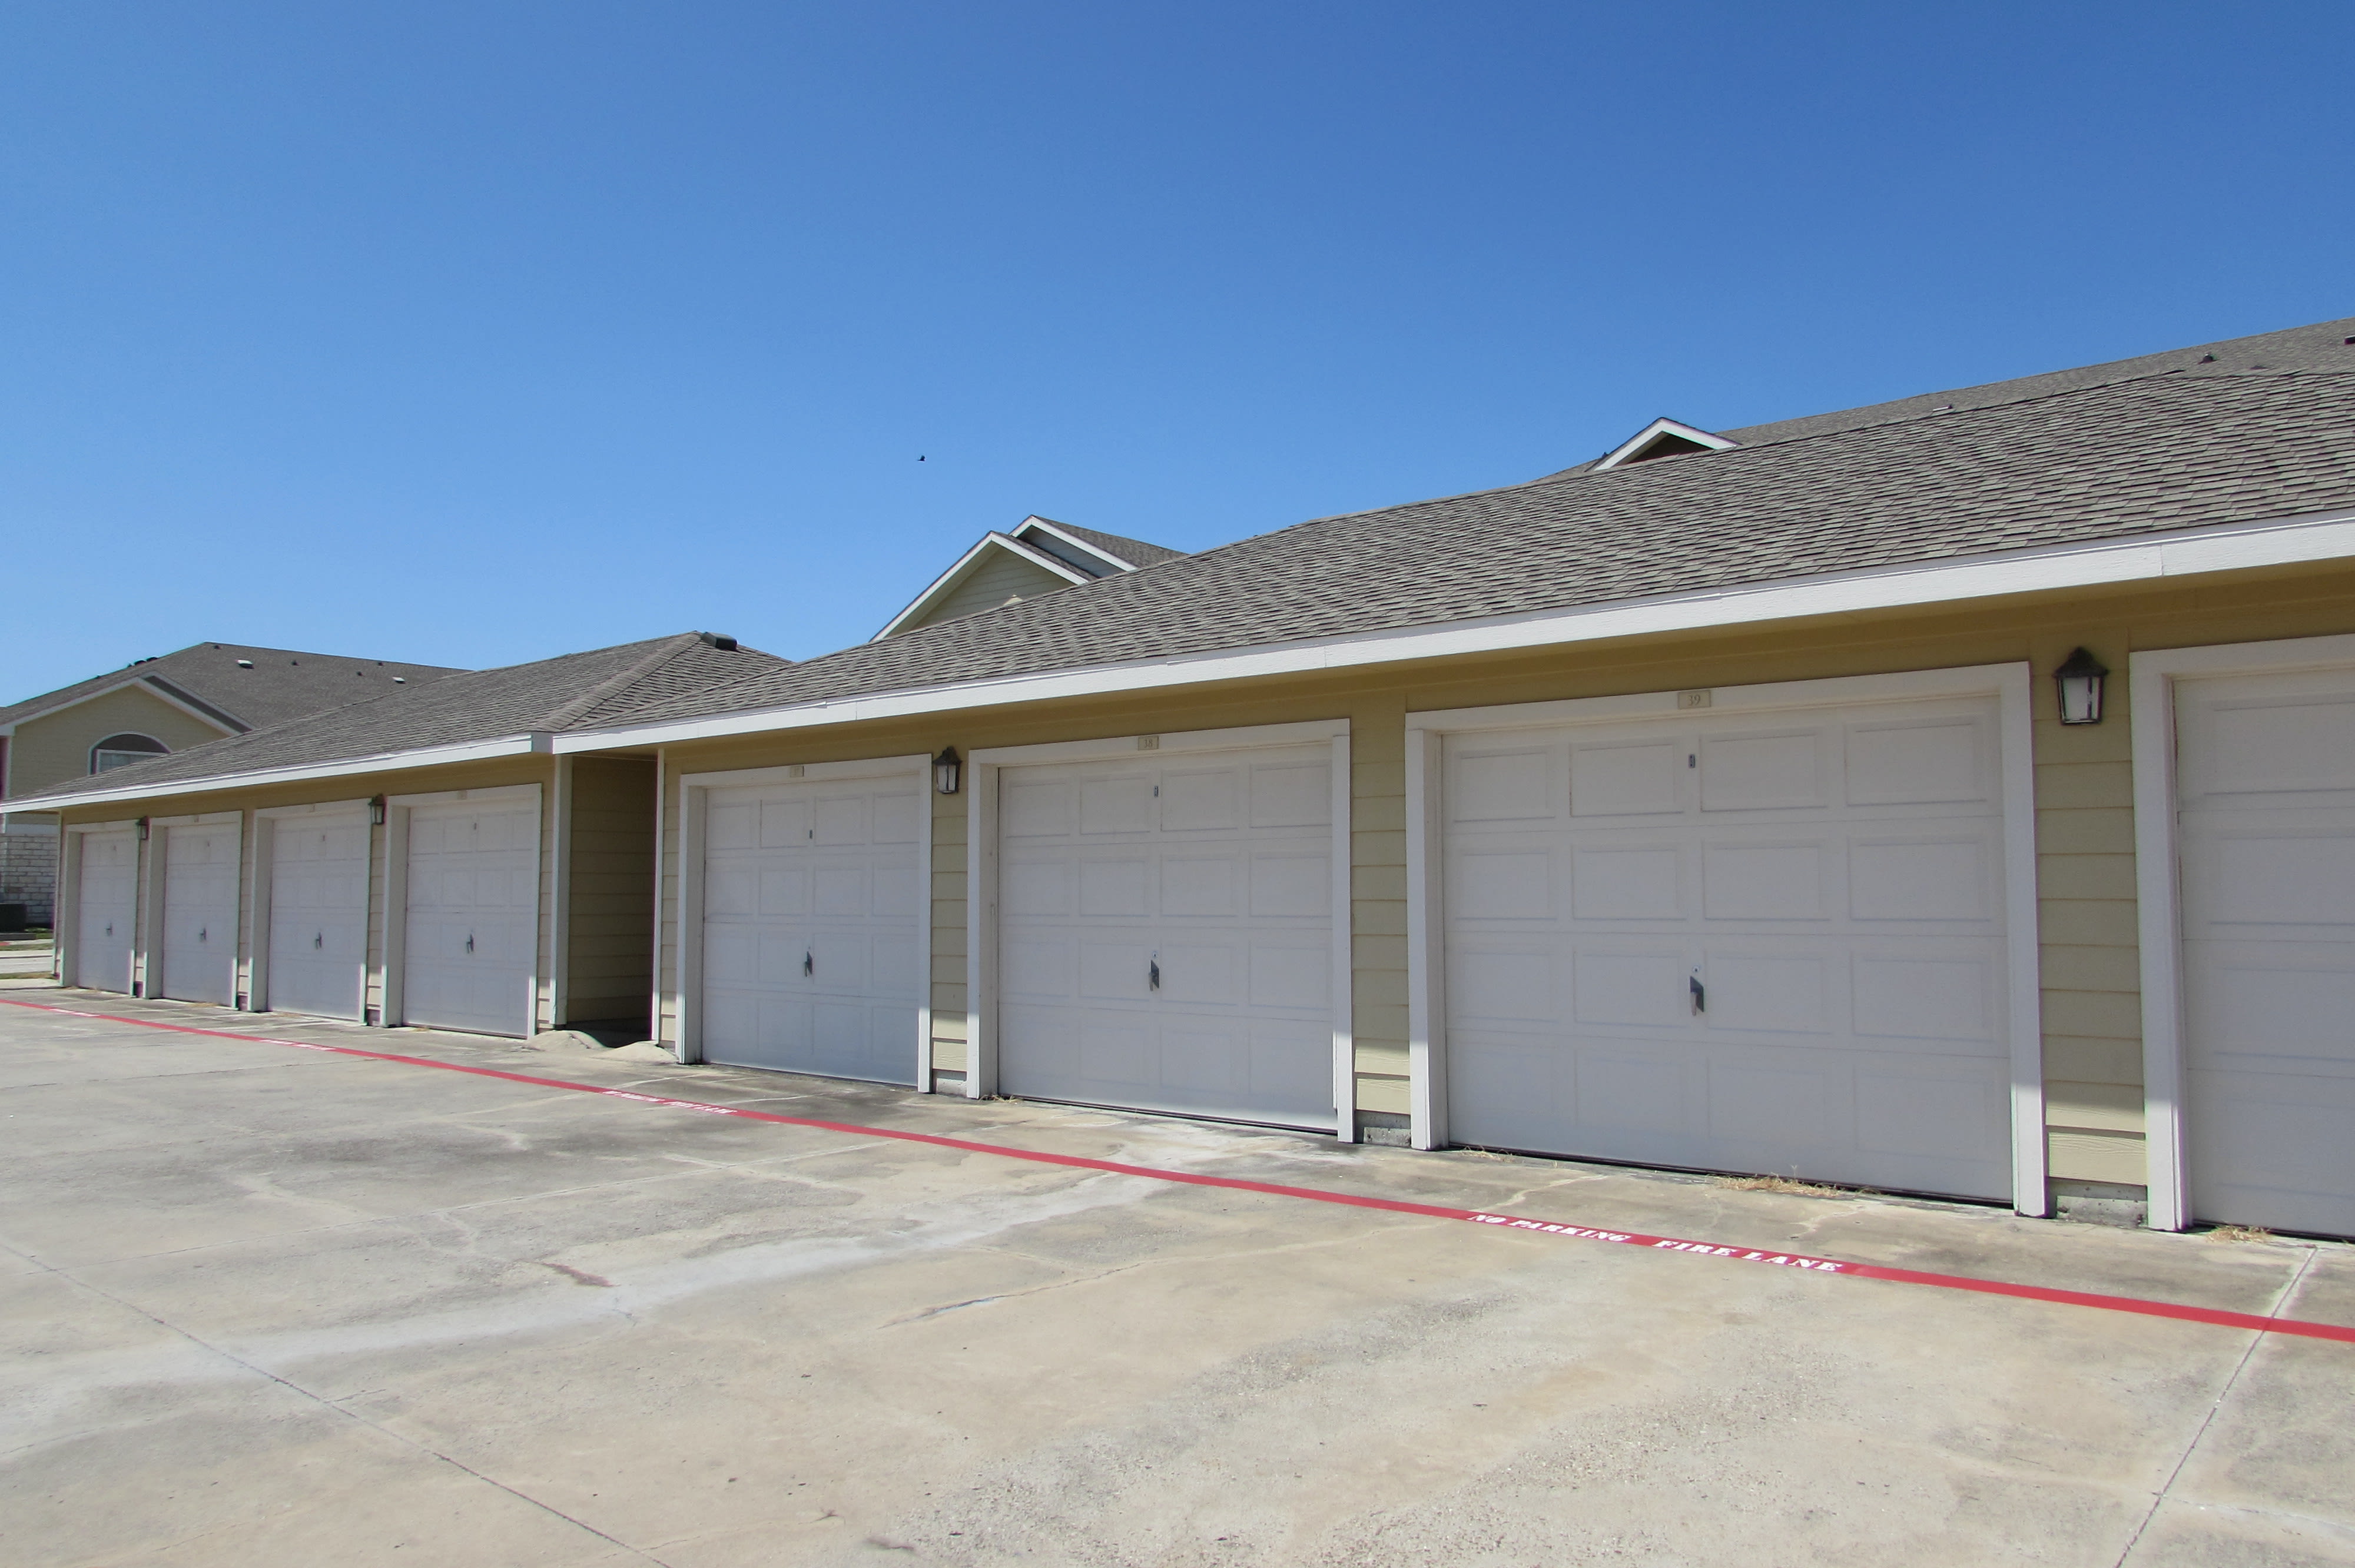 Private resident garages at Pavilions at Northshore in Portland, Texas